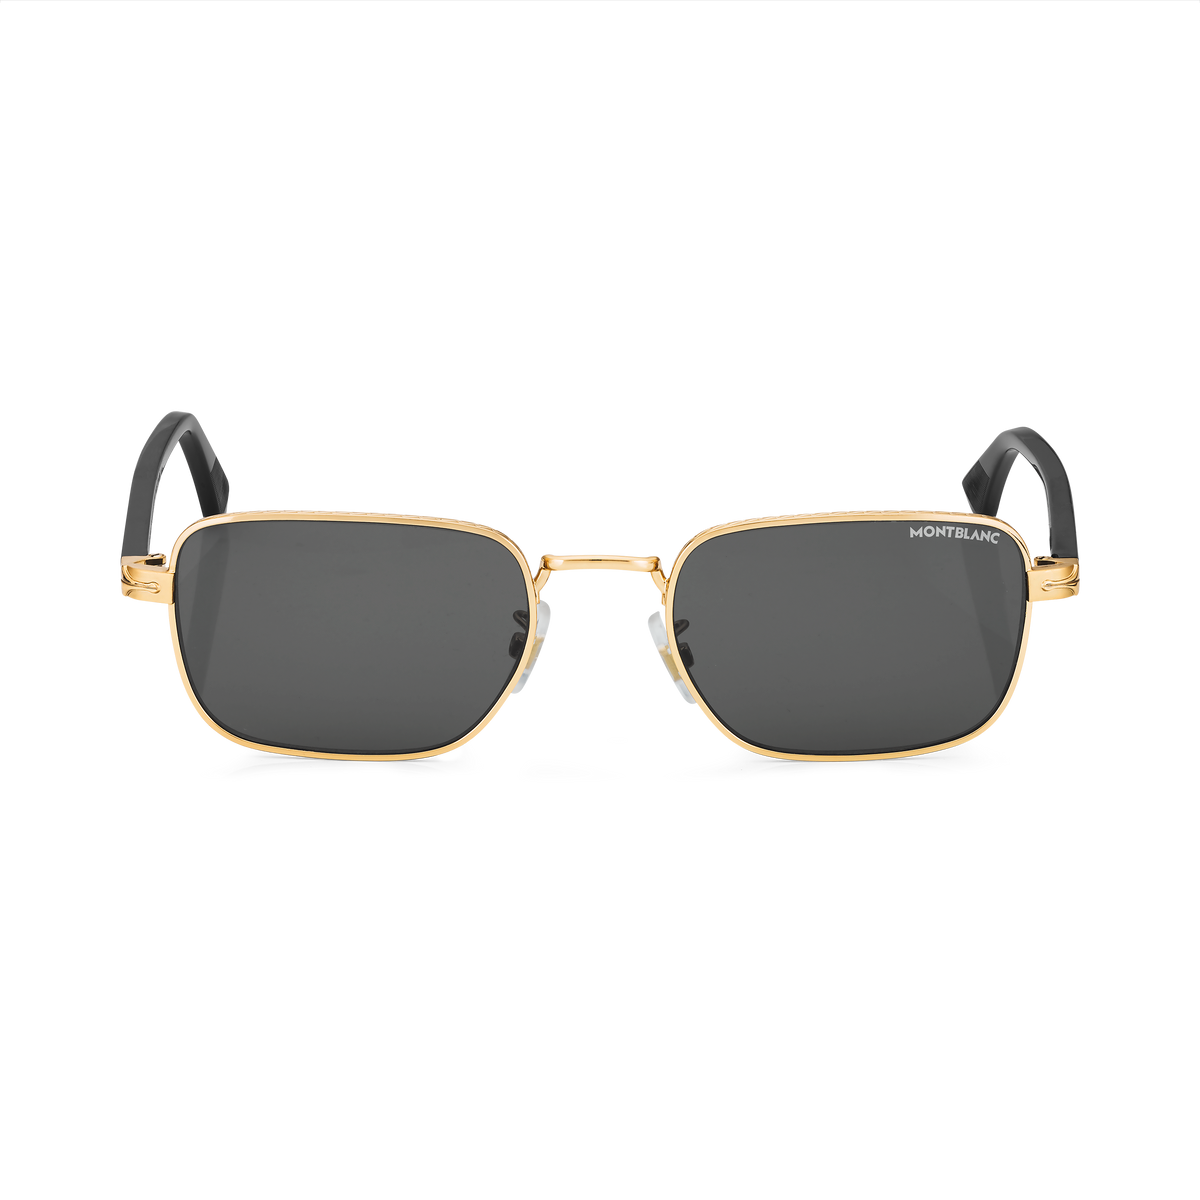 Rectangular Sunglasses with Gold-Colored Metal Frame